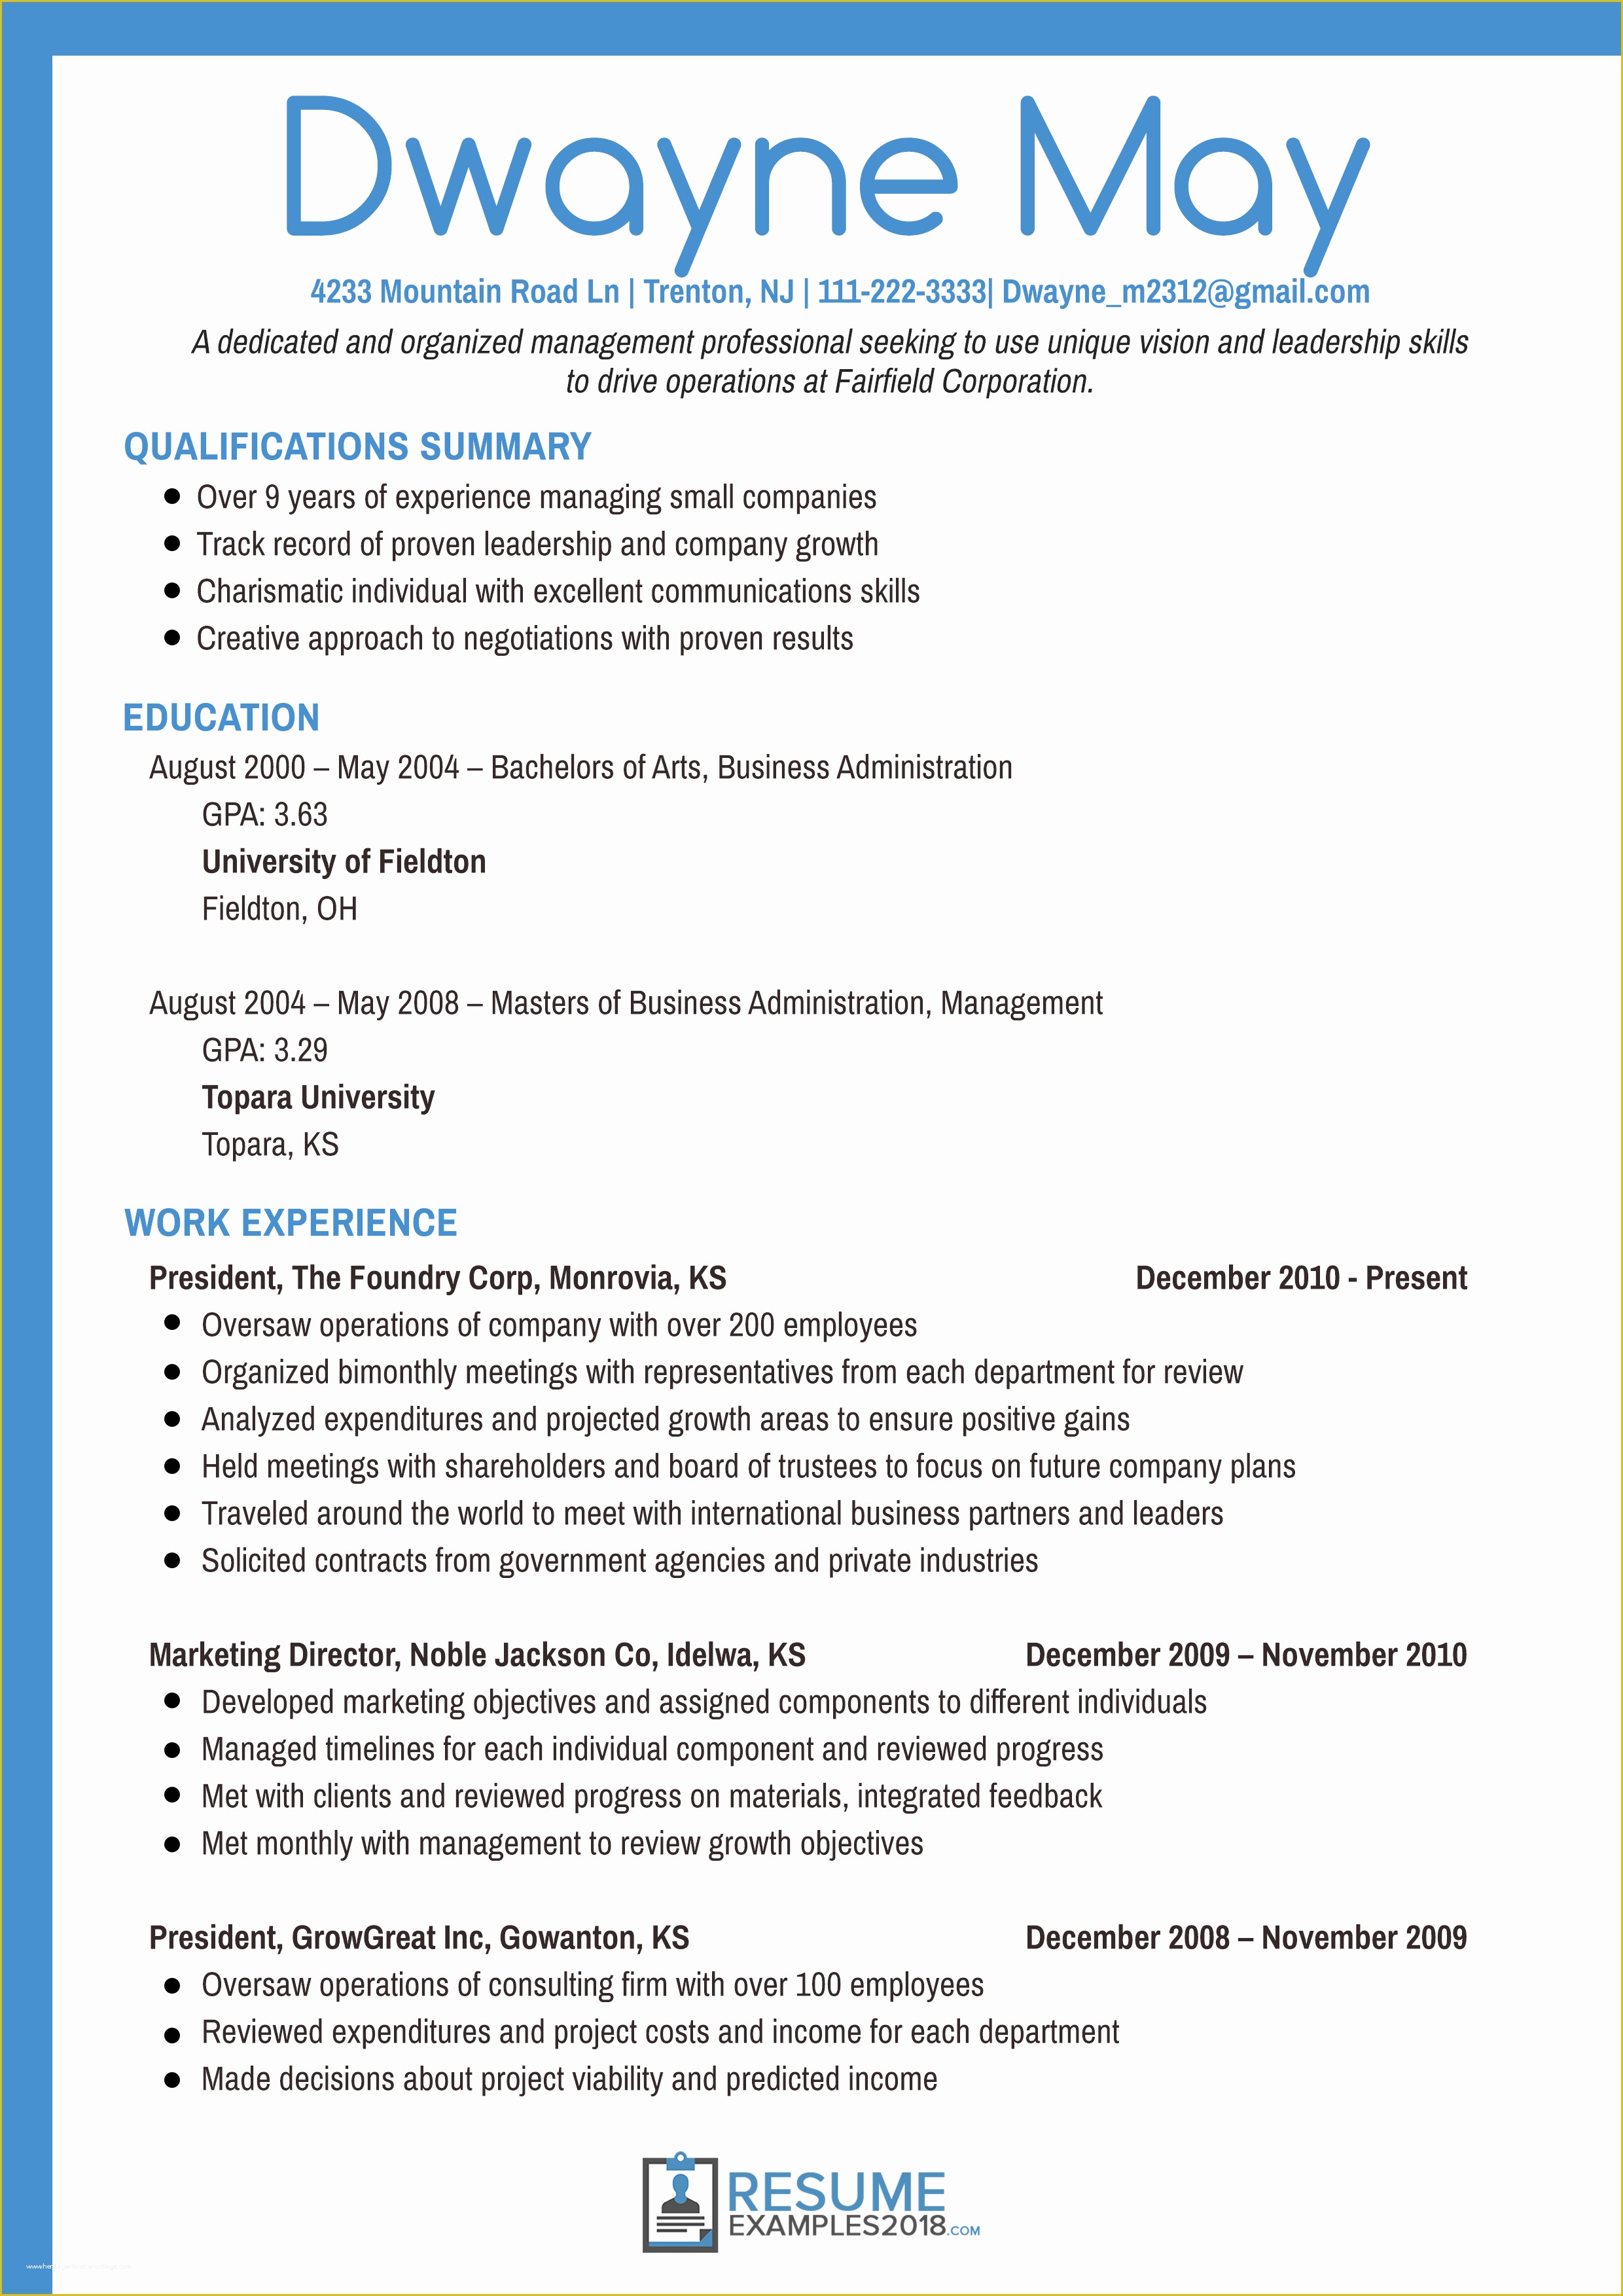 Free Business Resume Template 2018 Of Best Executive Resume Examples 2019 that Work